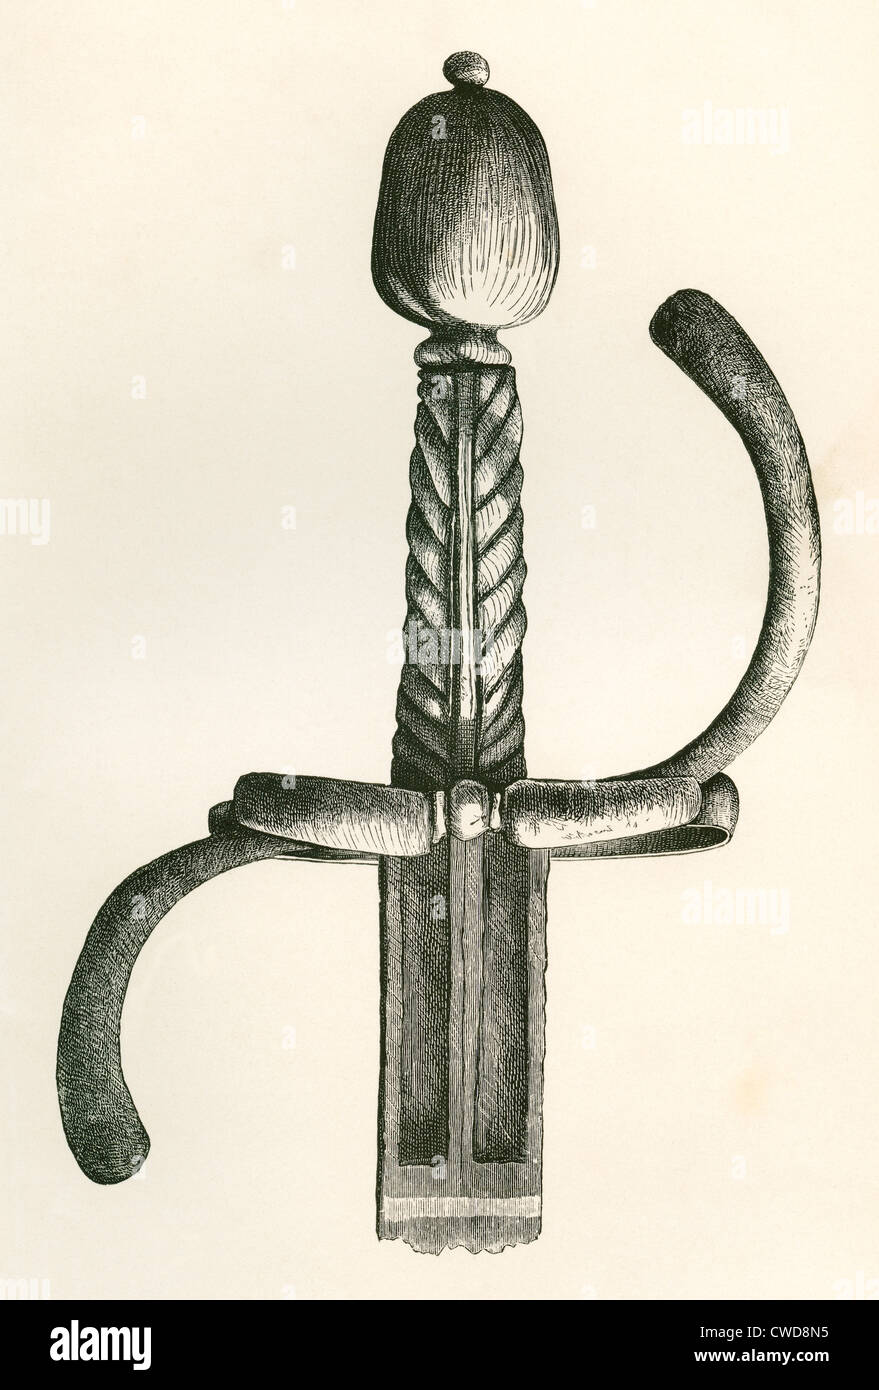 17th century Dutch musketeer's sword. From The British Army: Its Origins, Progress and Equipment, published 1868. Stock Photo